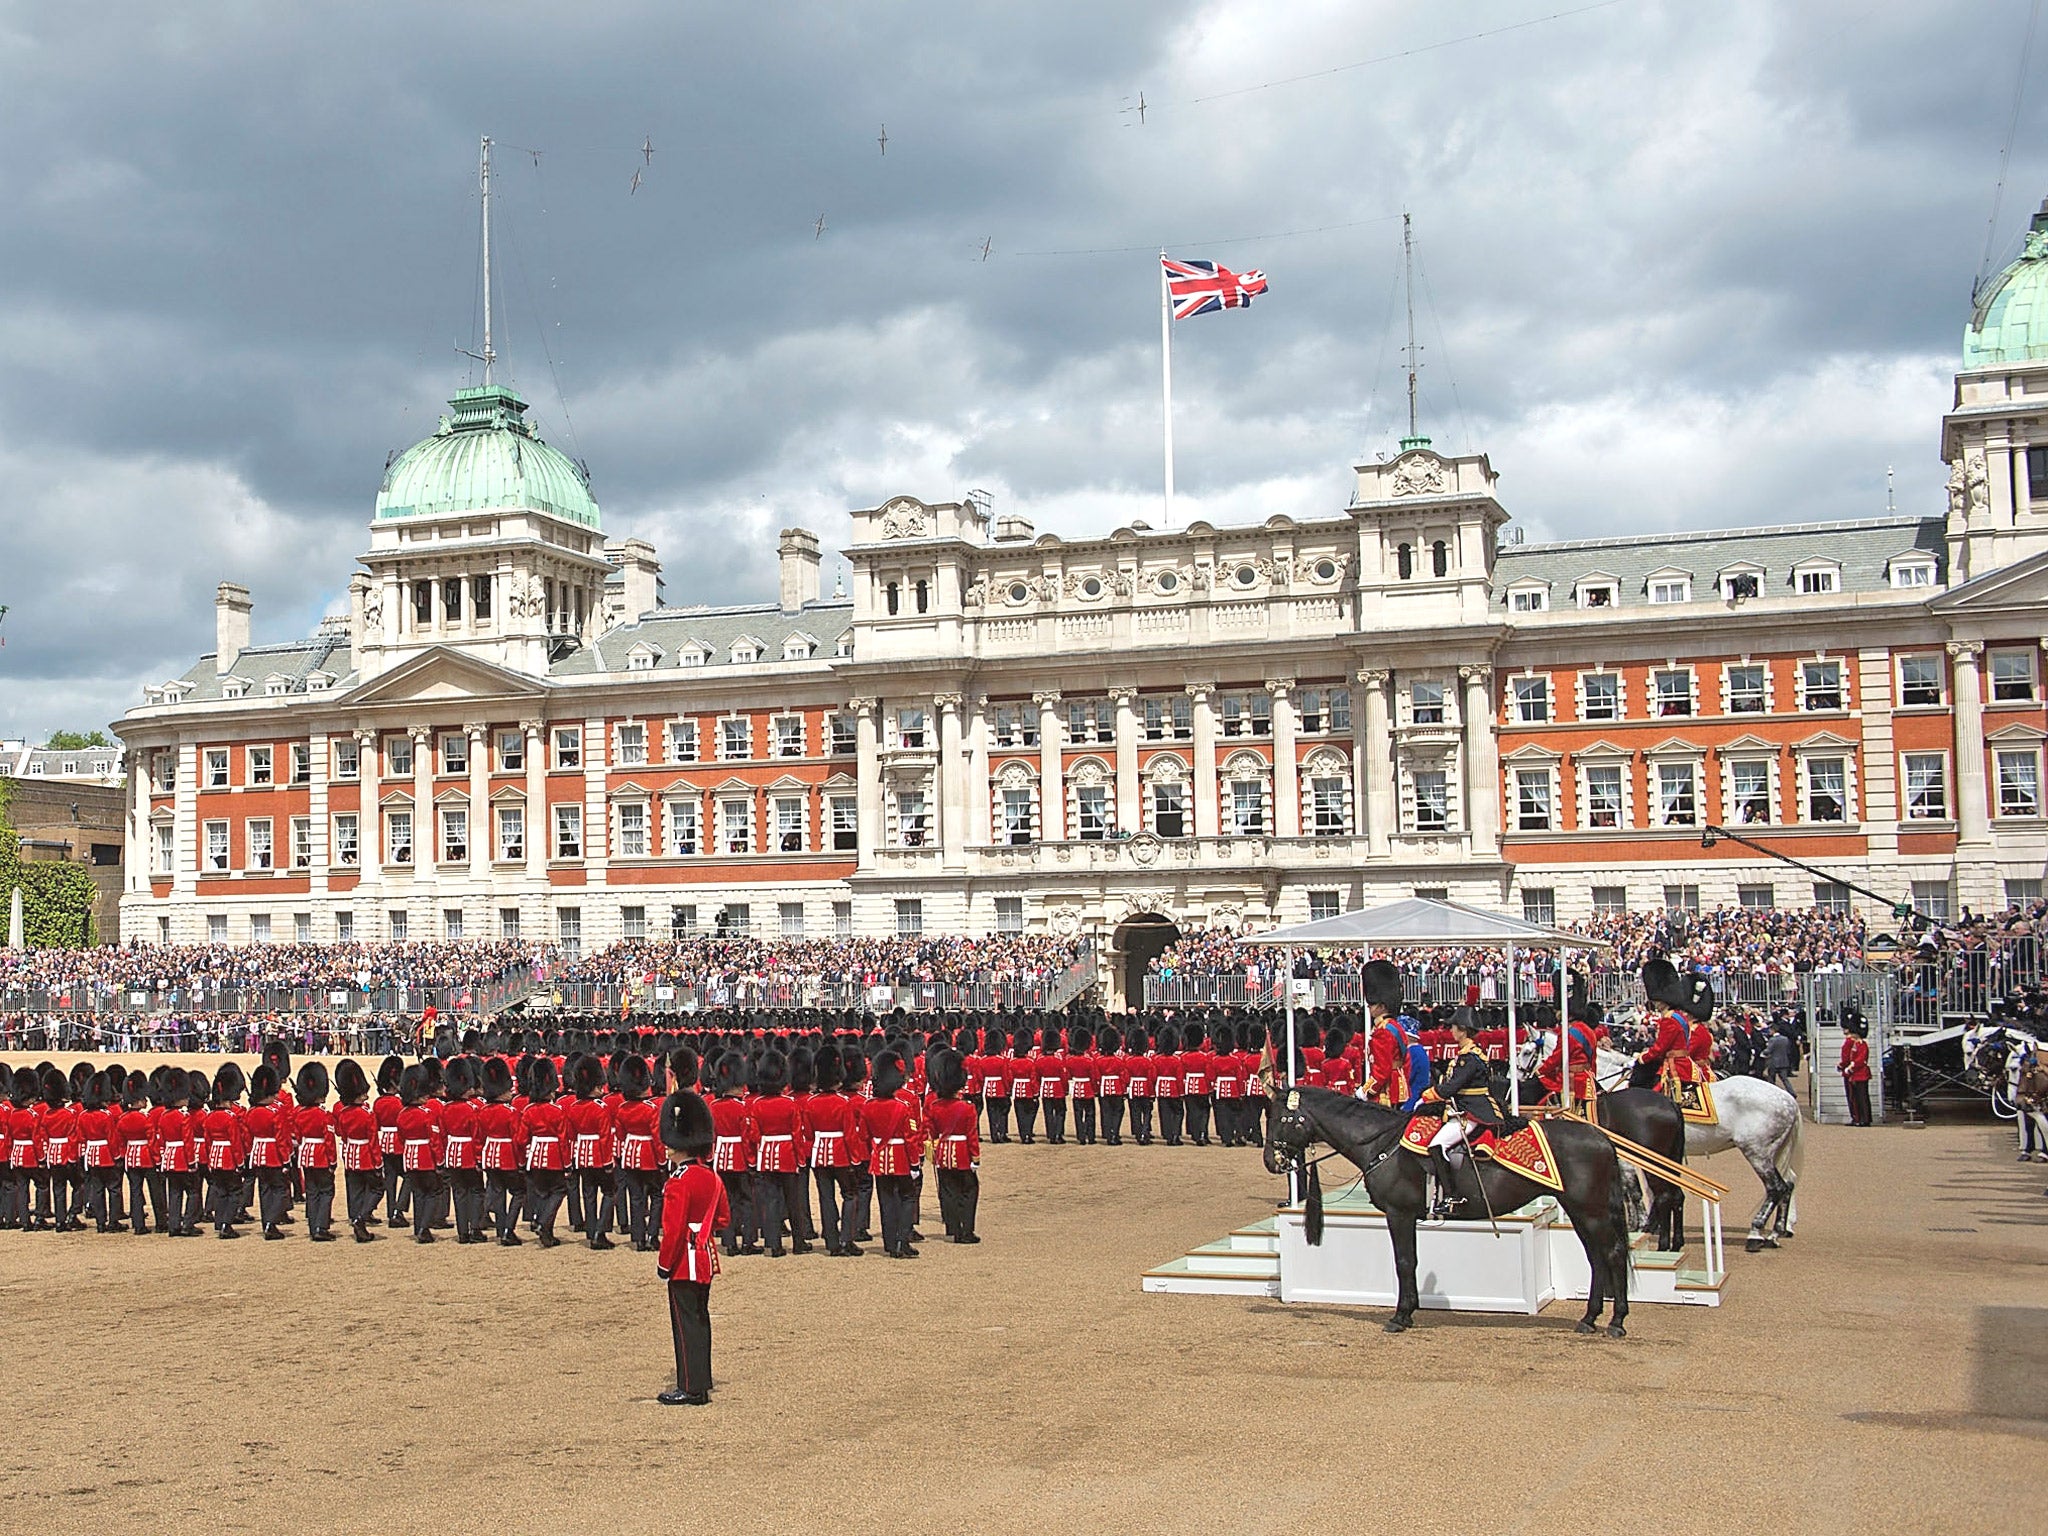 The Old Admiralty Building, pictured here at Trooping the Colour last month, is part of the complex near Whitehall